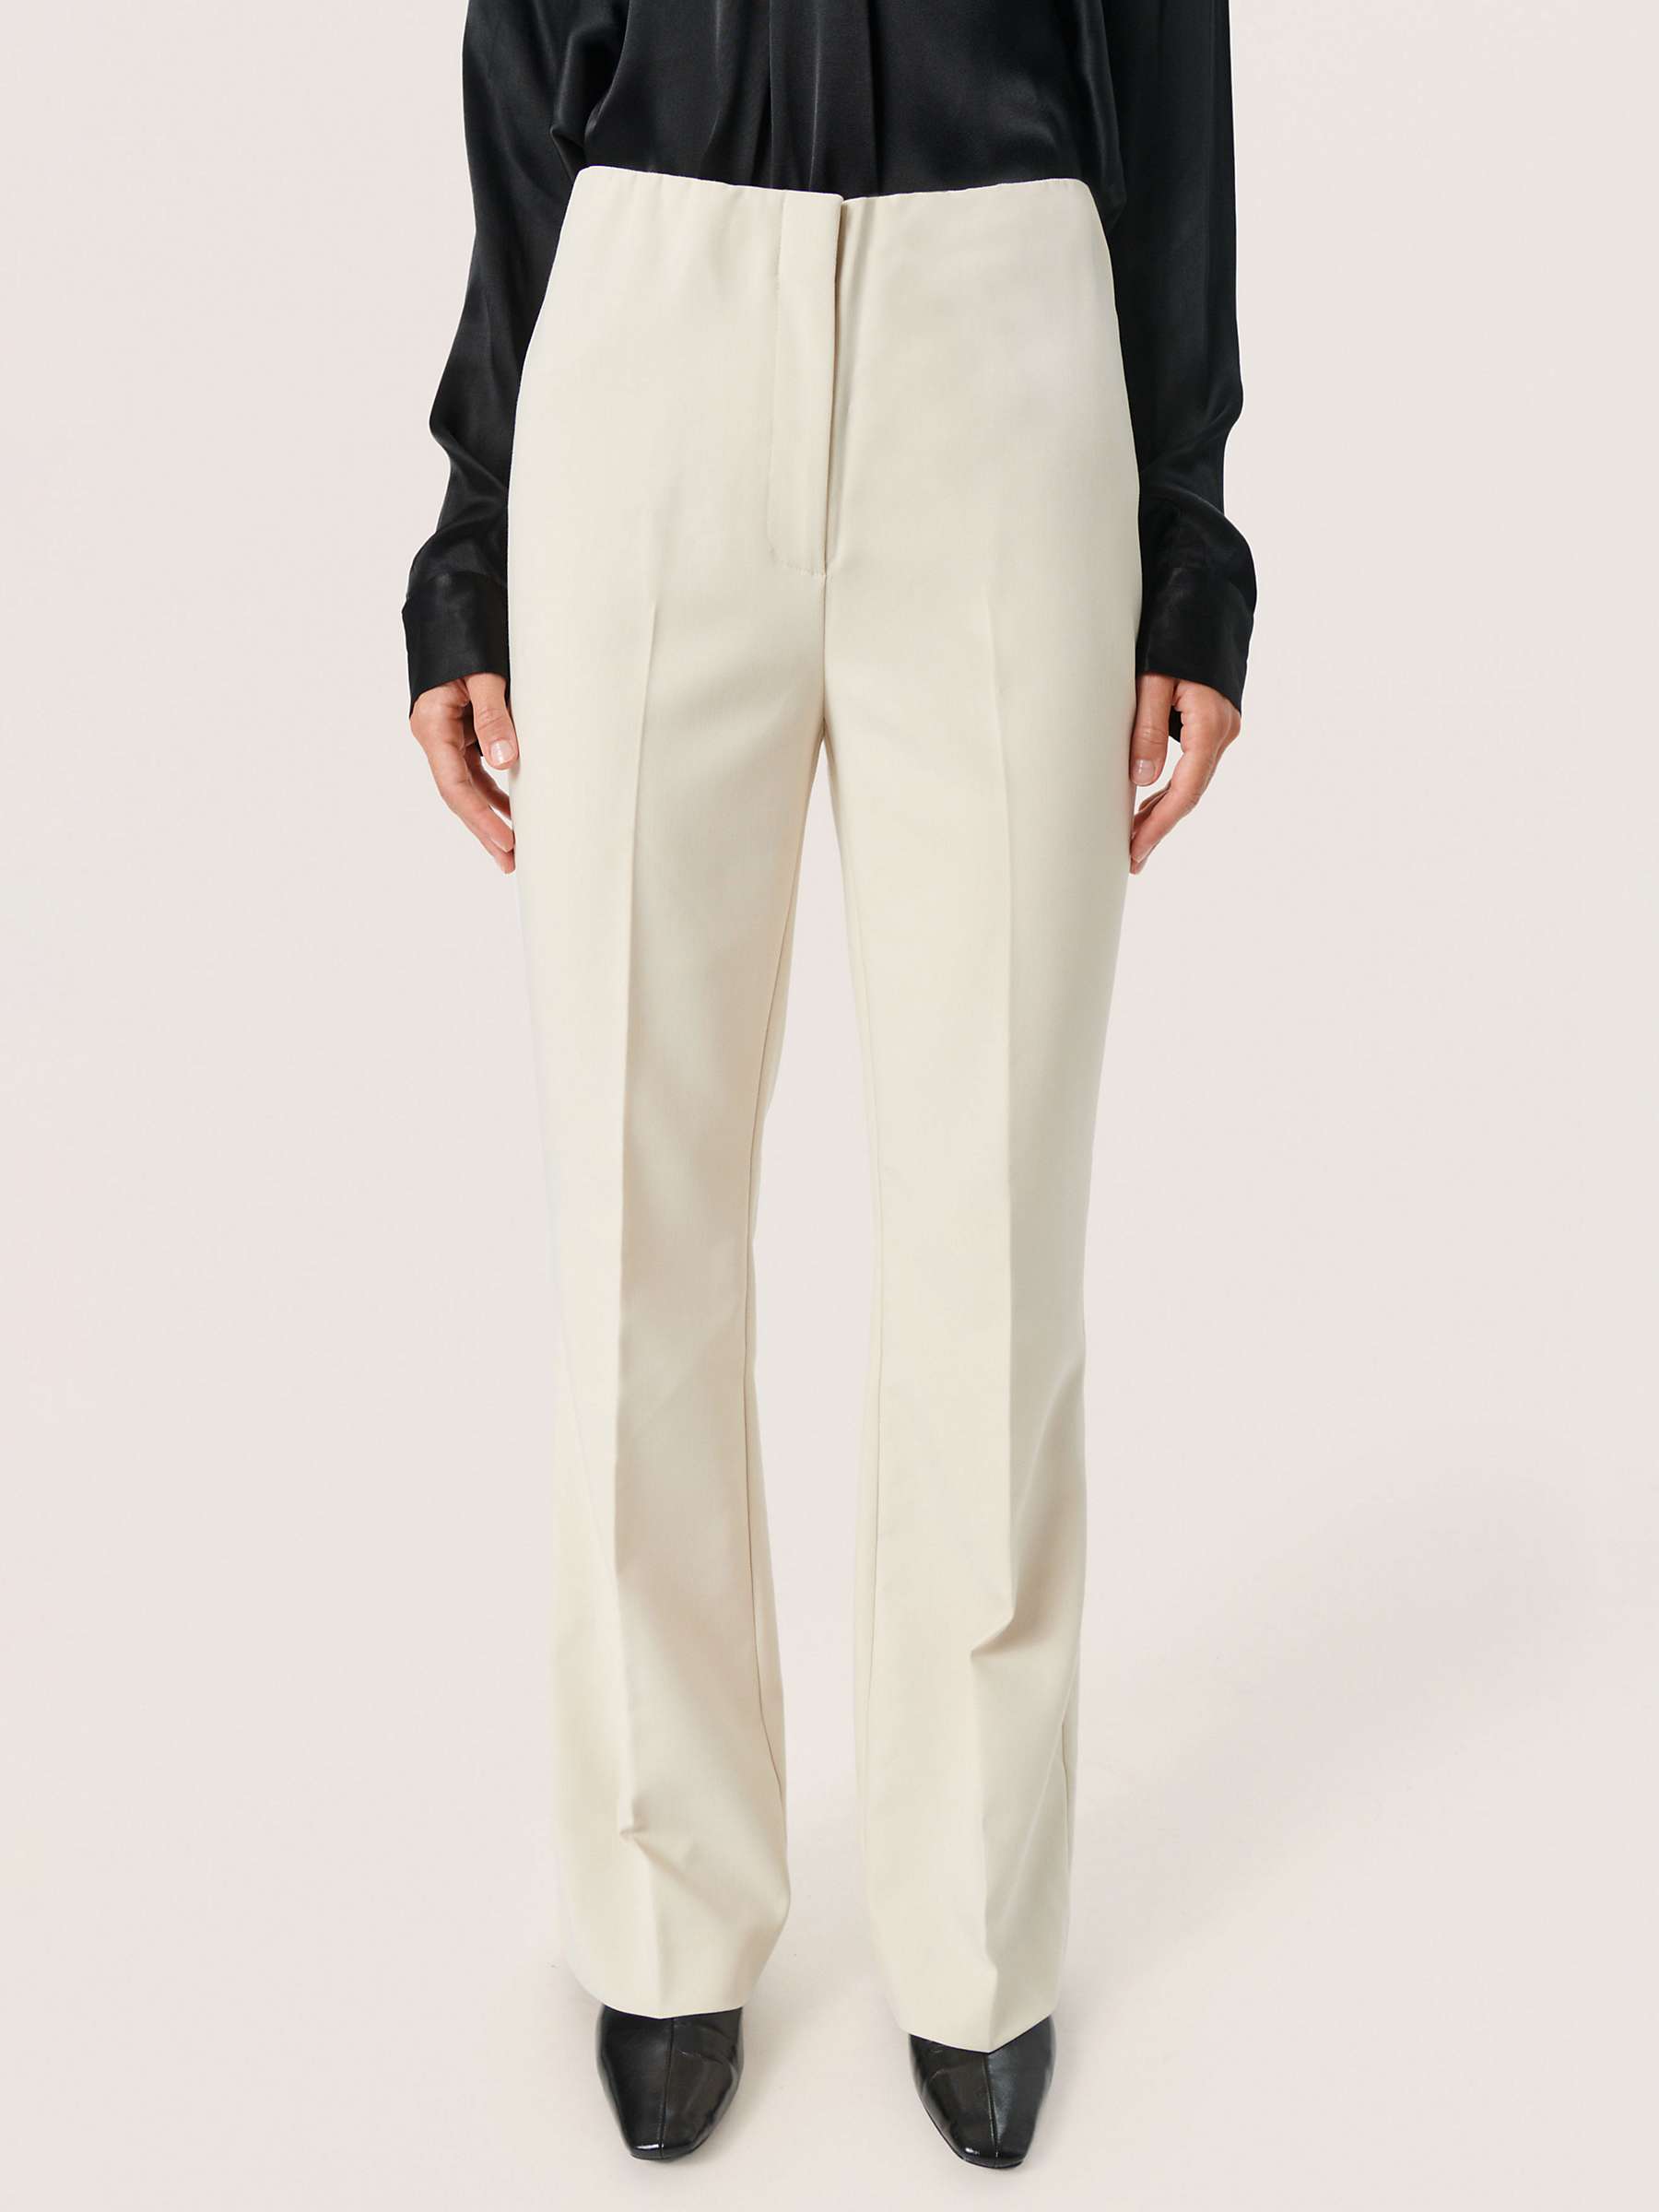 Buy Soaked In Luxury Corrine Stretch Trousers, Sandshell Online at johnlewis.com